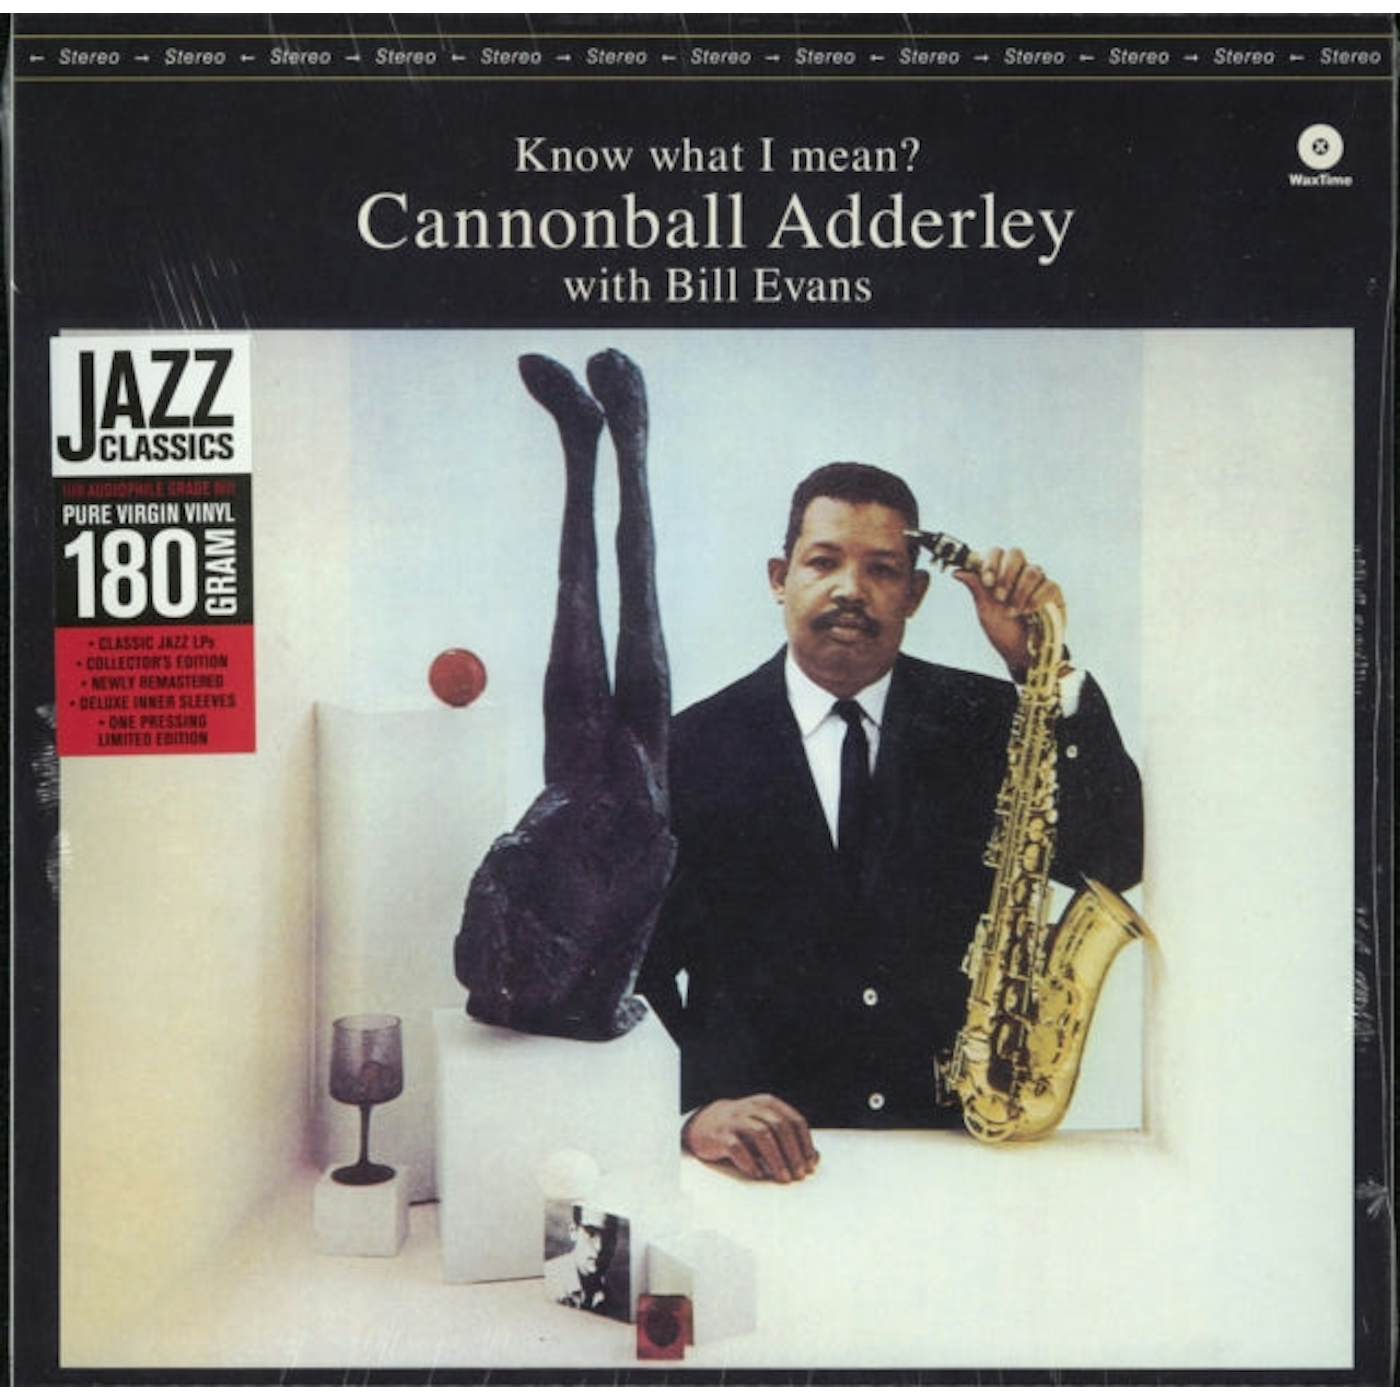 Cannonball Adderley LP Vinyl Record - Know What I Mean?